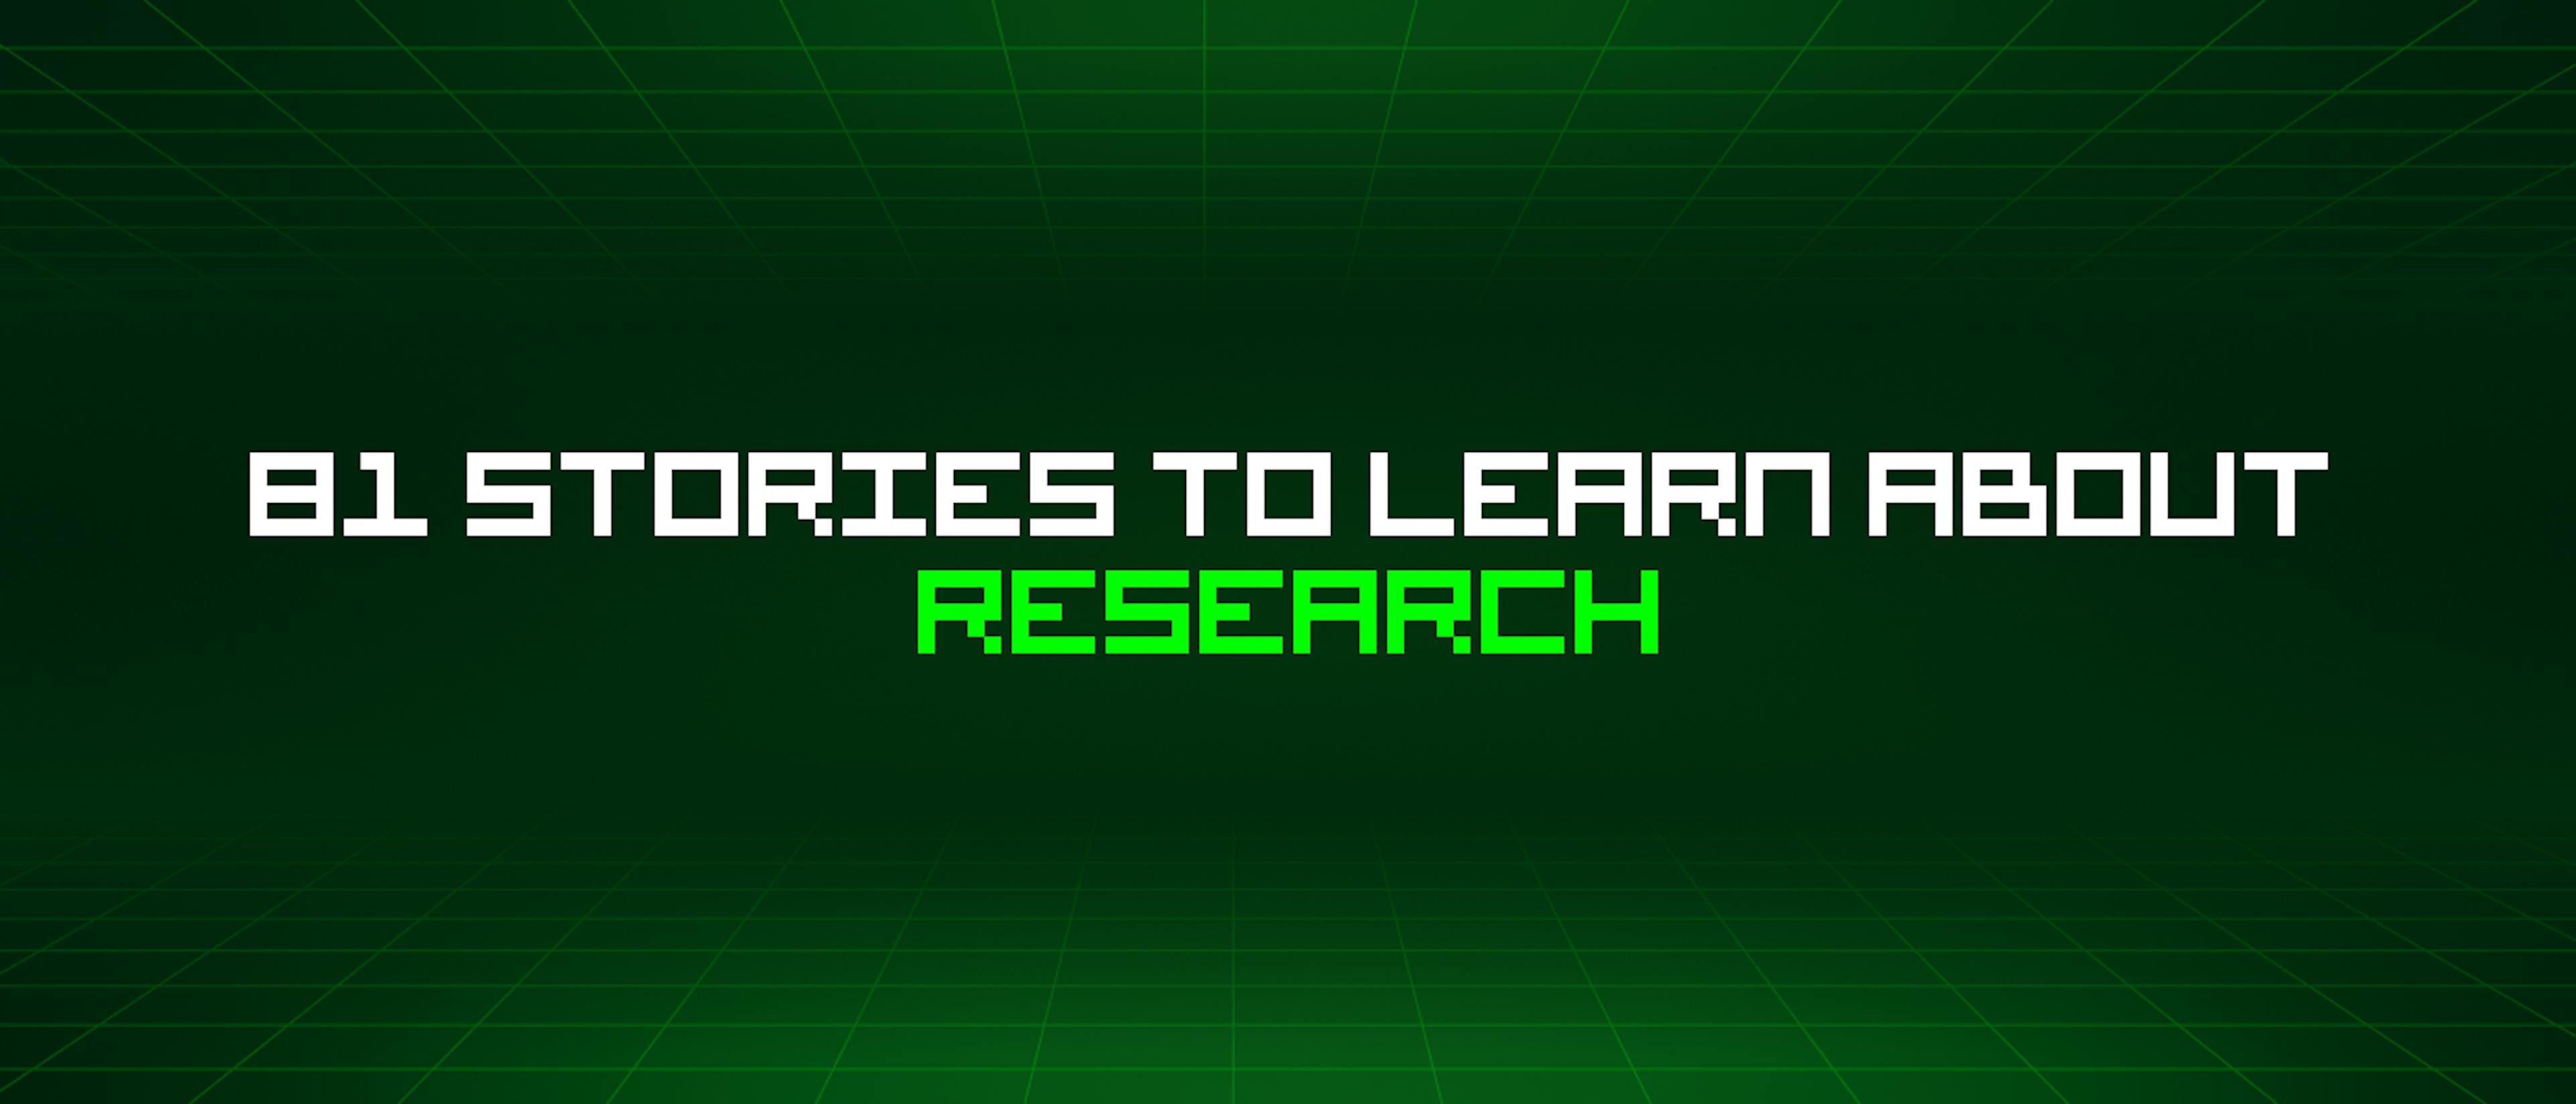 featured image - 81 Stories To Learn About Research